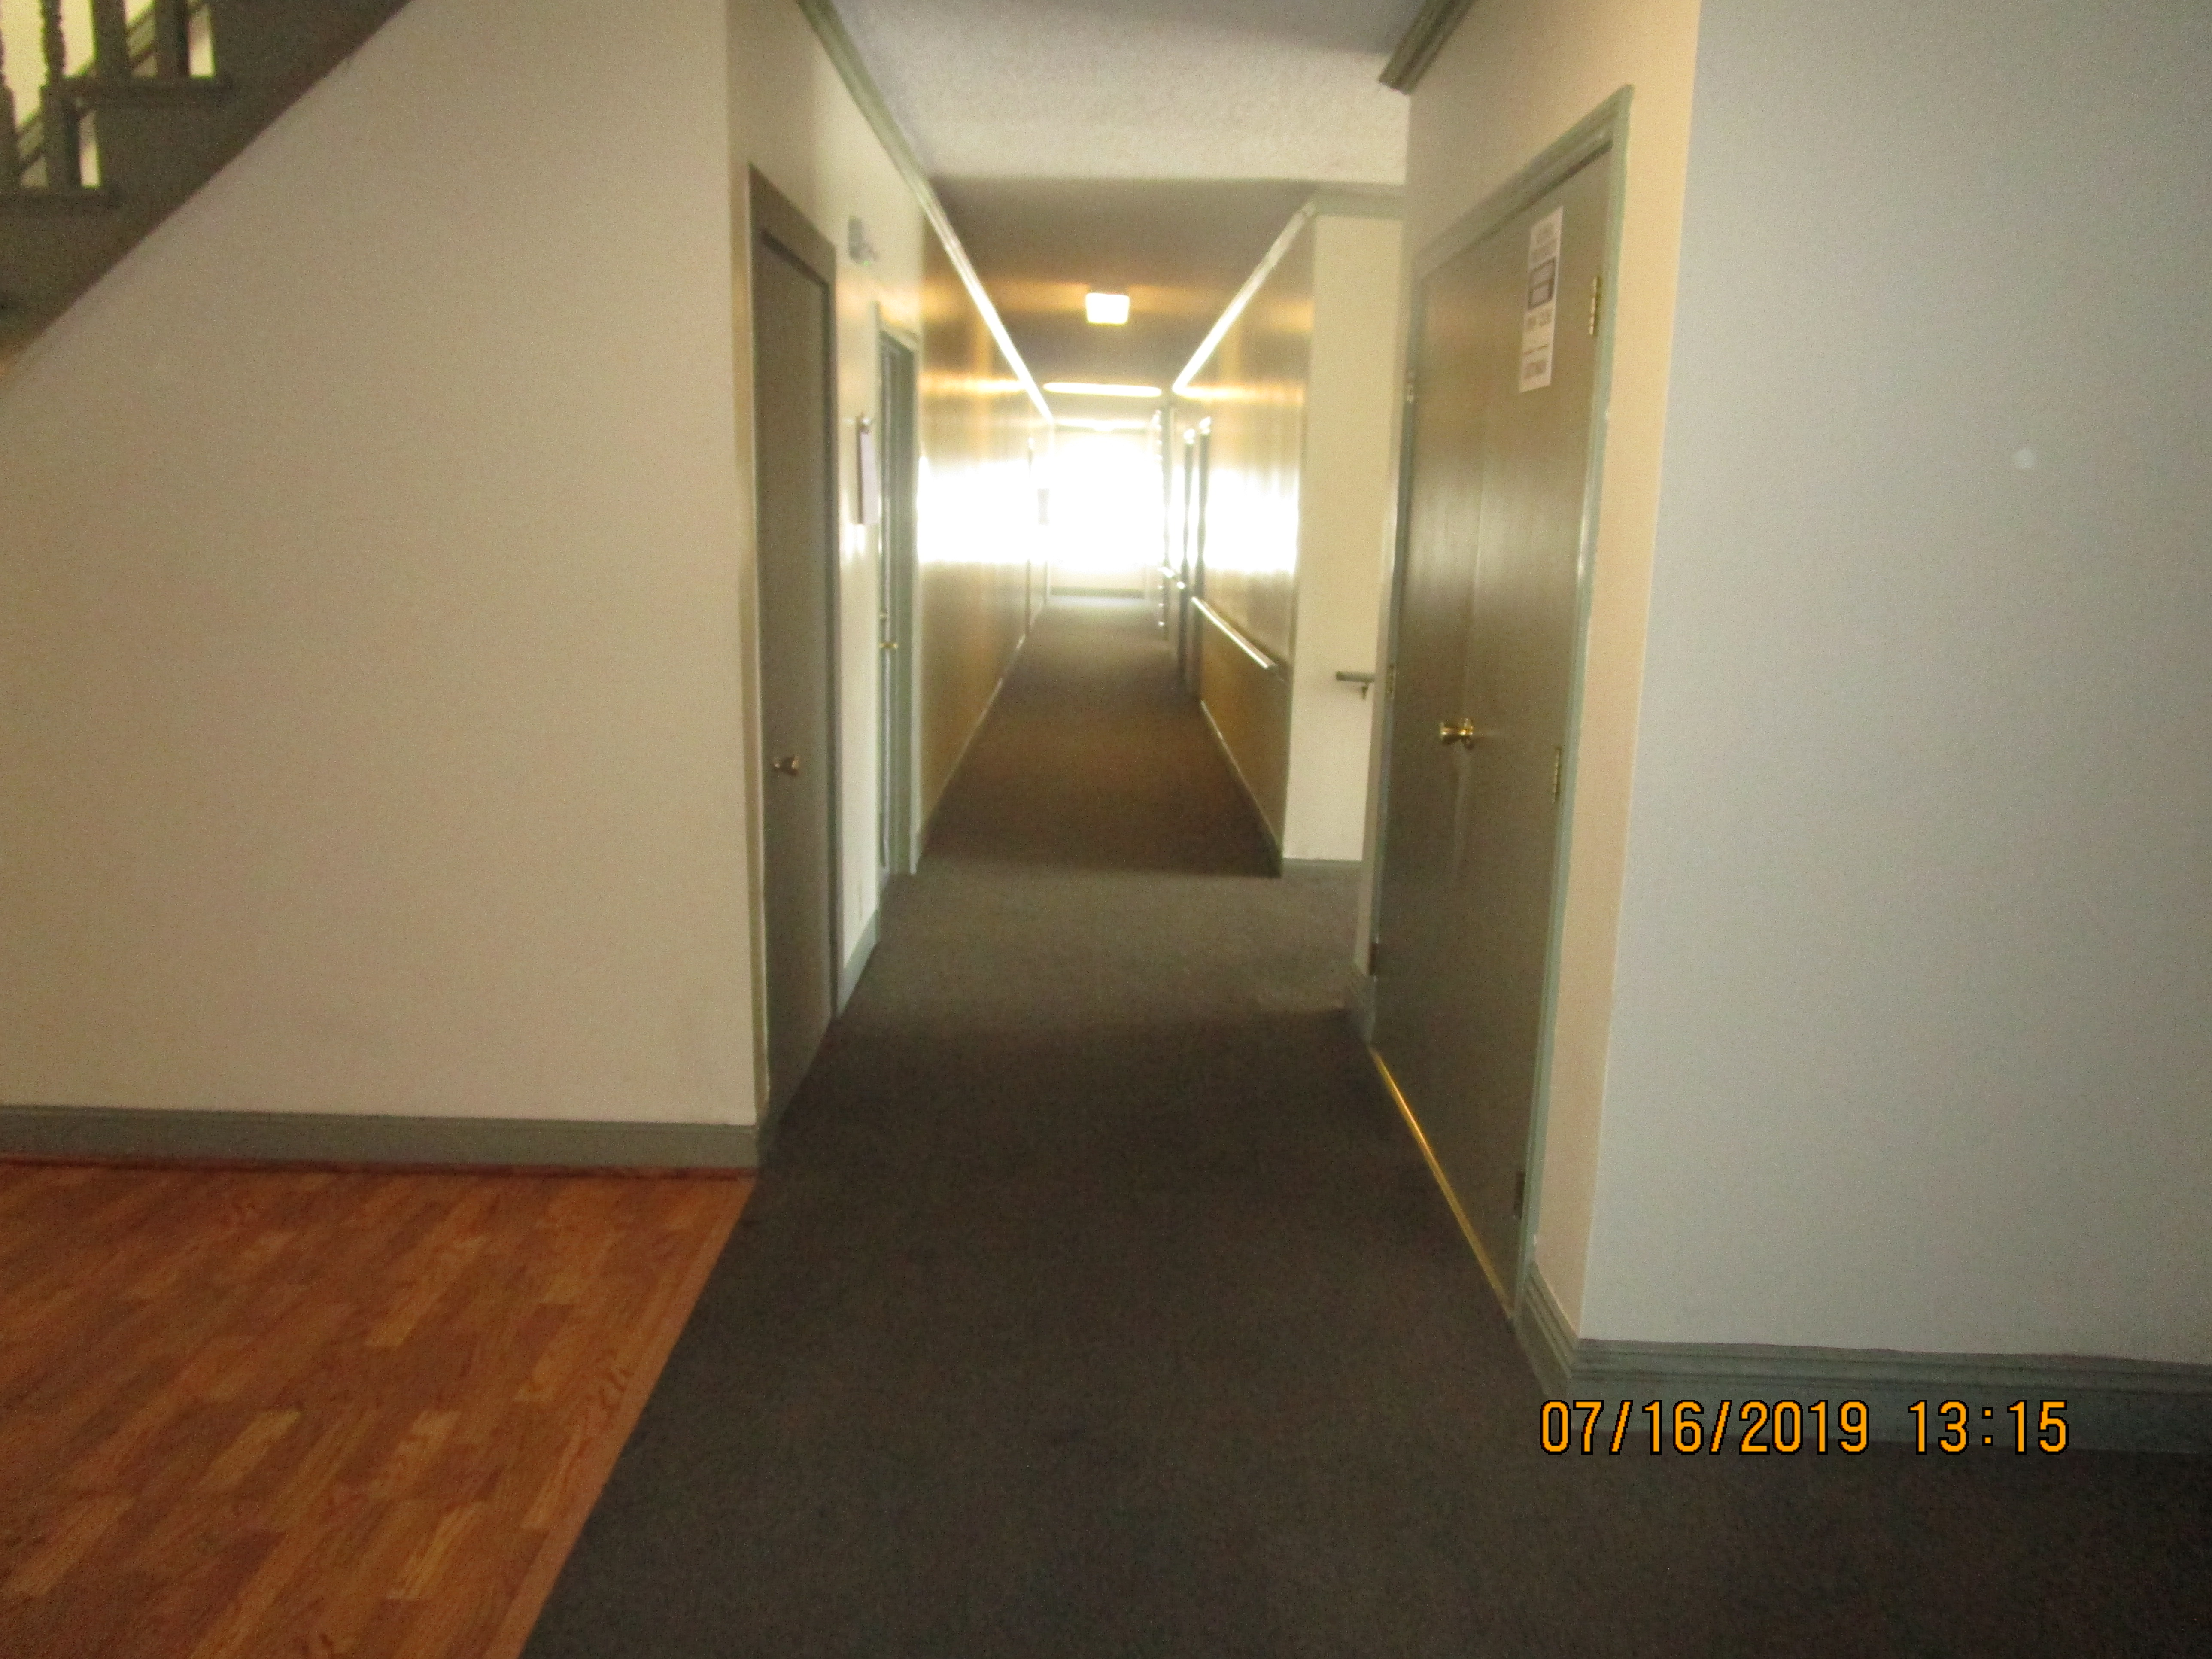 Image of the building hallway